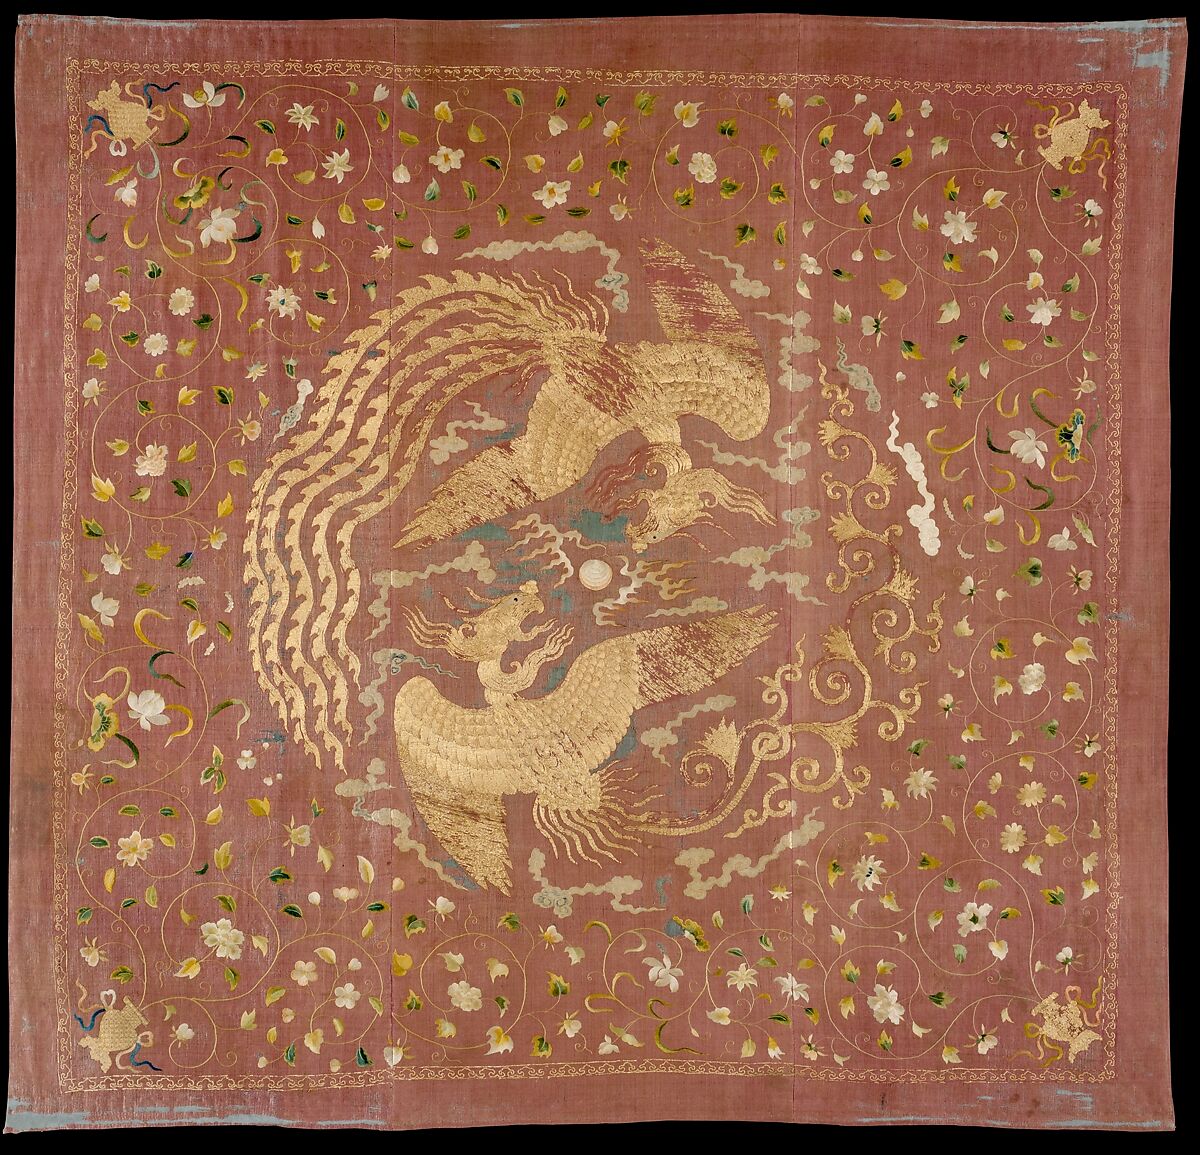 Panel with Phoenixes and Flowers, Silk and metallic thread embroidery on silk gauze, China 